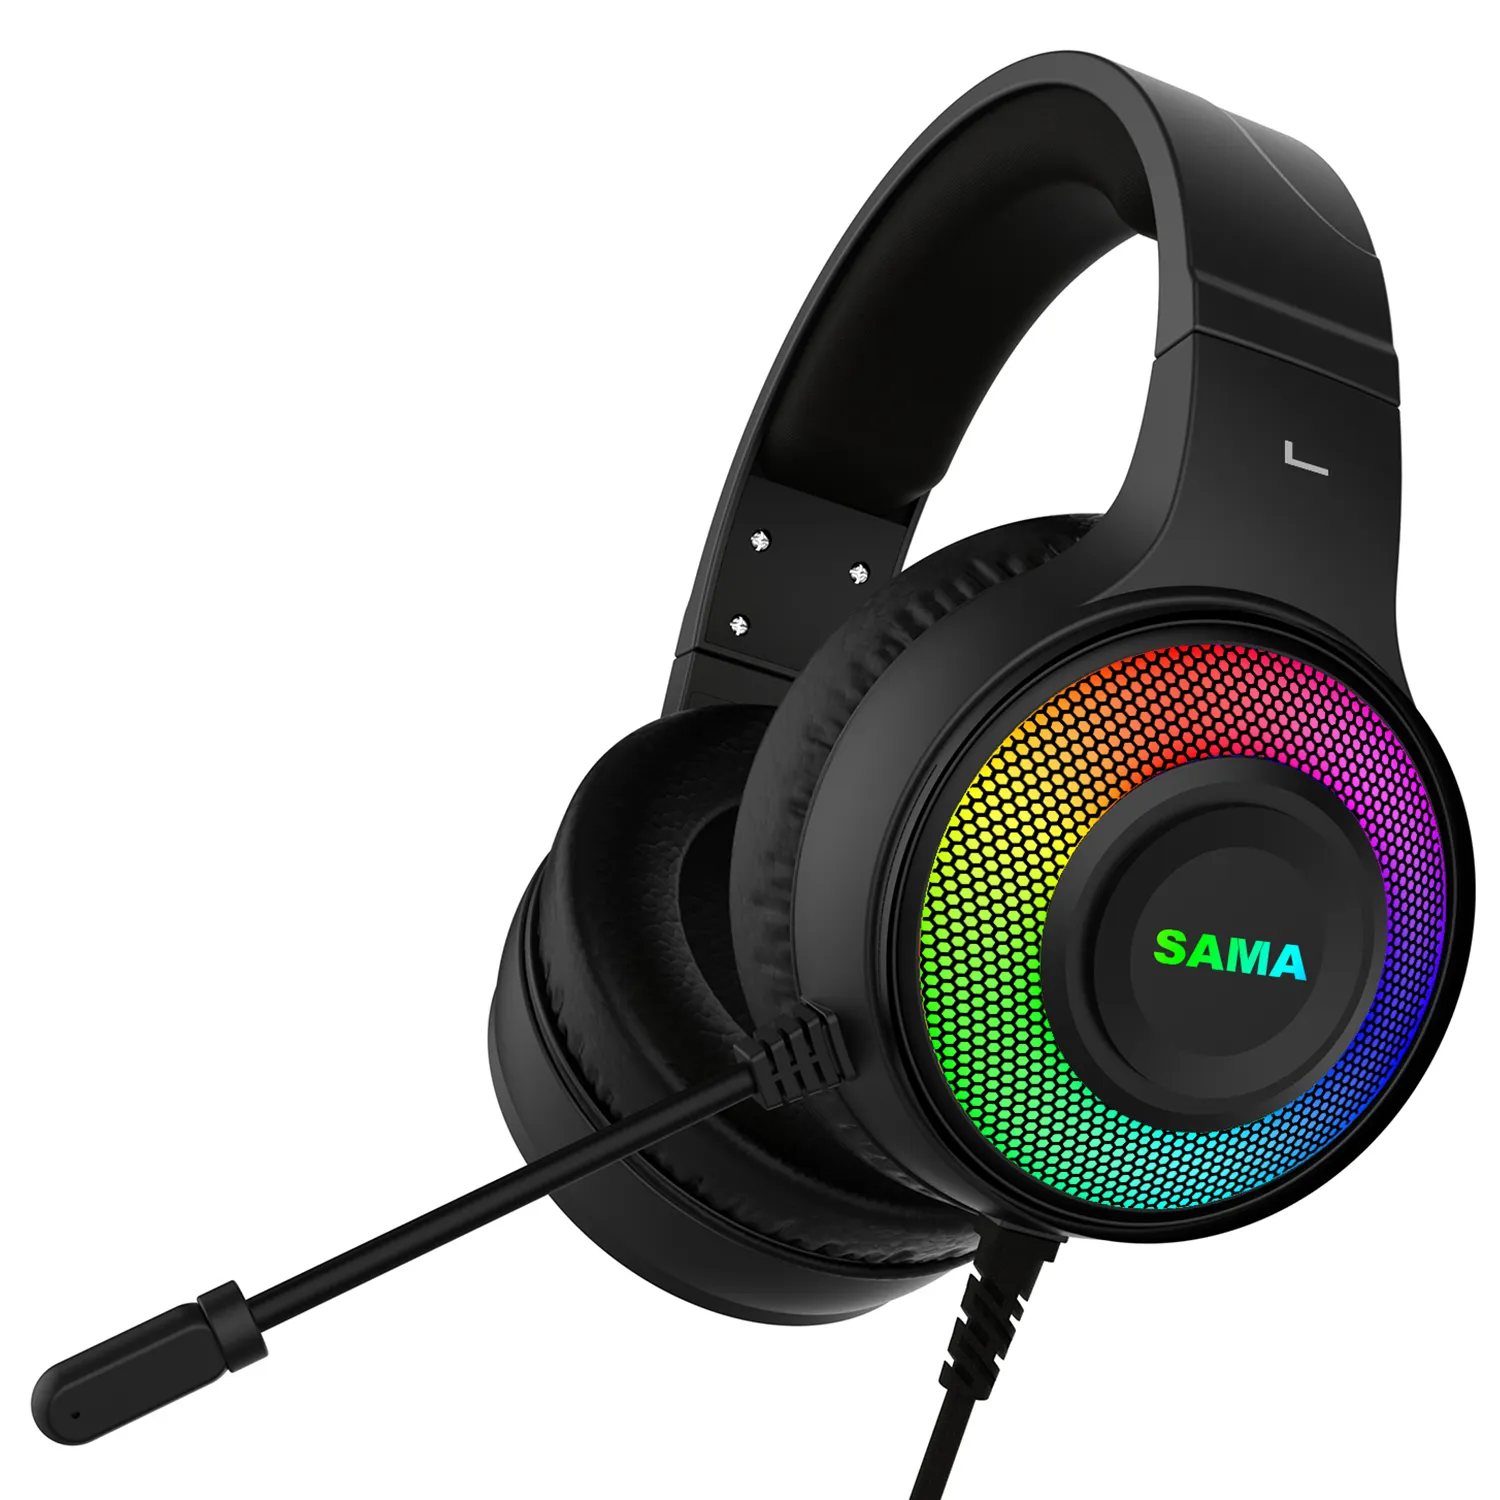 SAMA OEM Gaming Headset Headphones Wired Stereo 7.1 Bass Surround Casque Computer RGB Light Gaming Headset With Mic